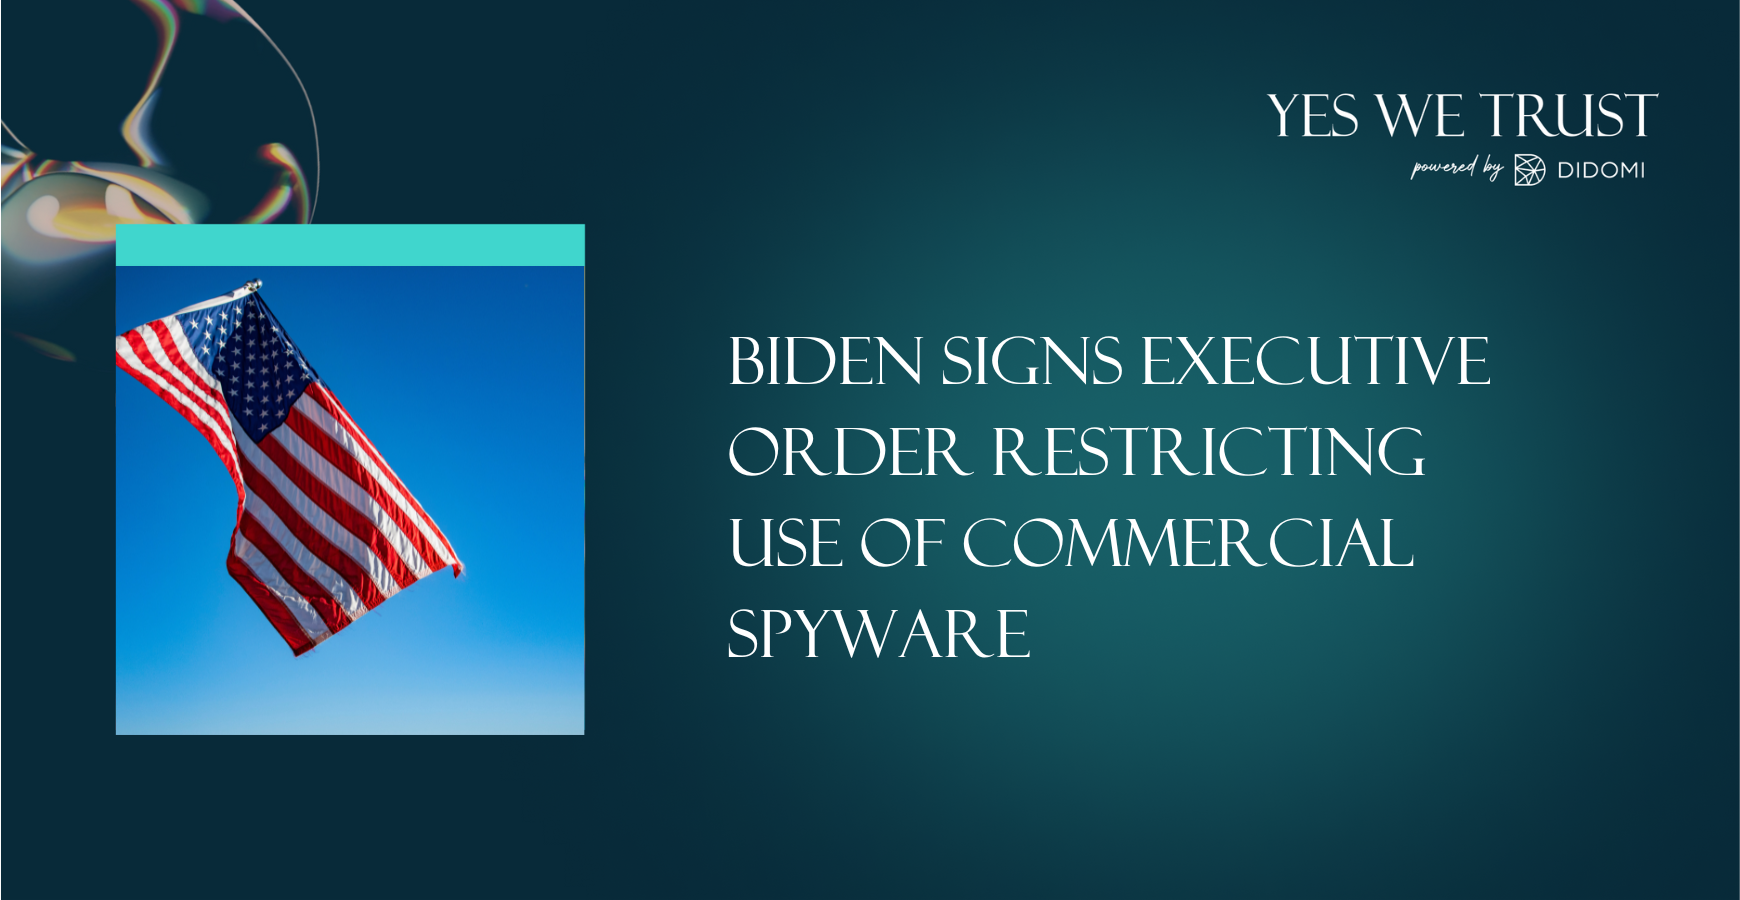 Biden signs executive order restricting use of commercial spyware